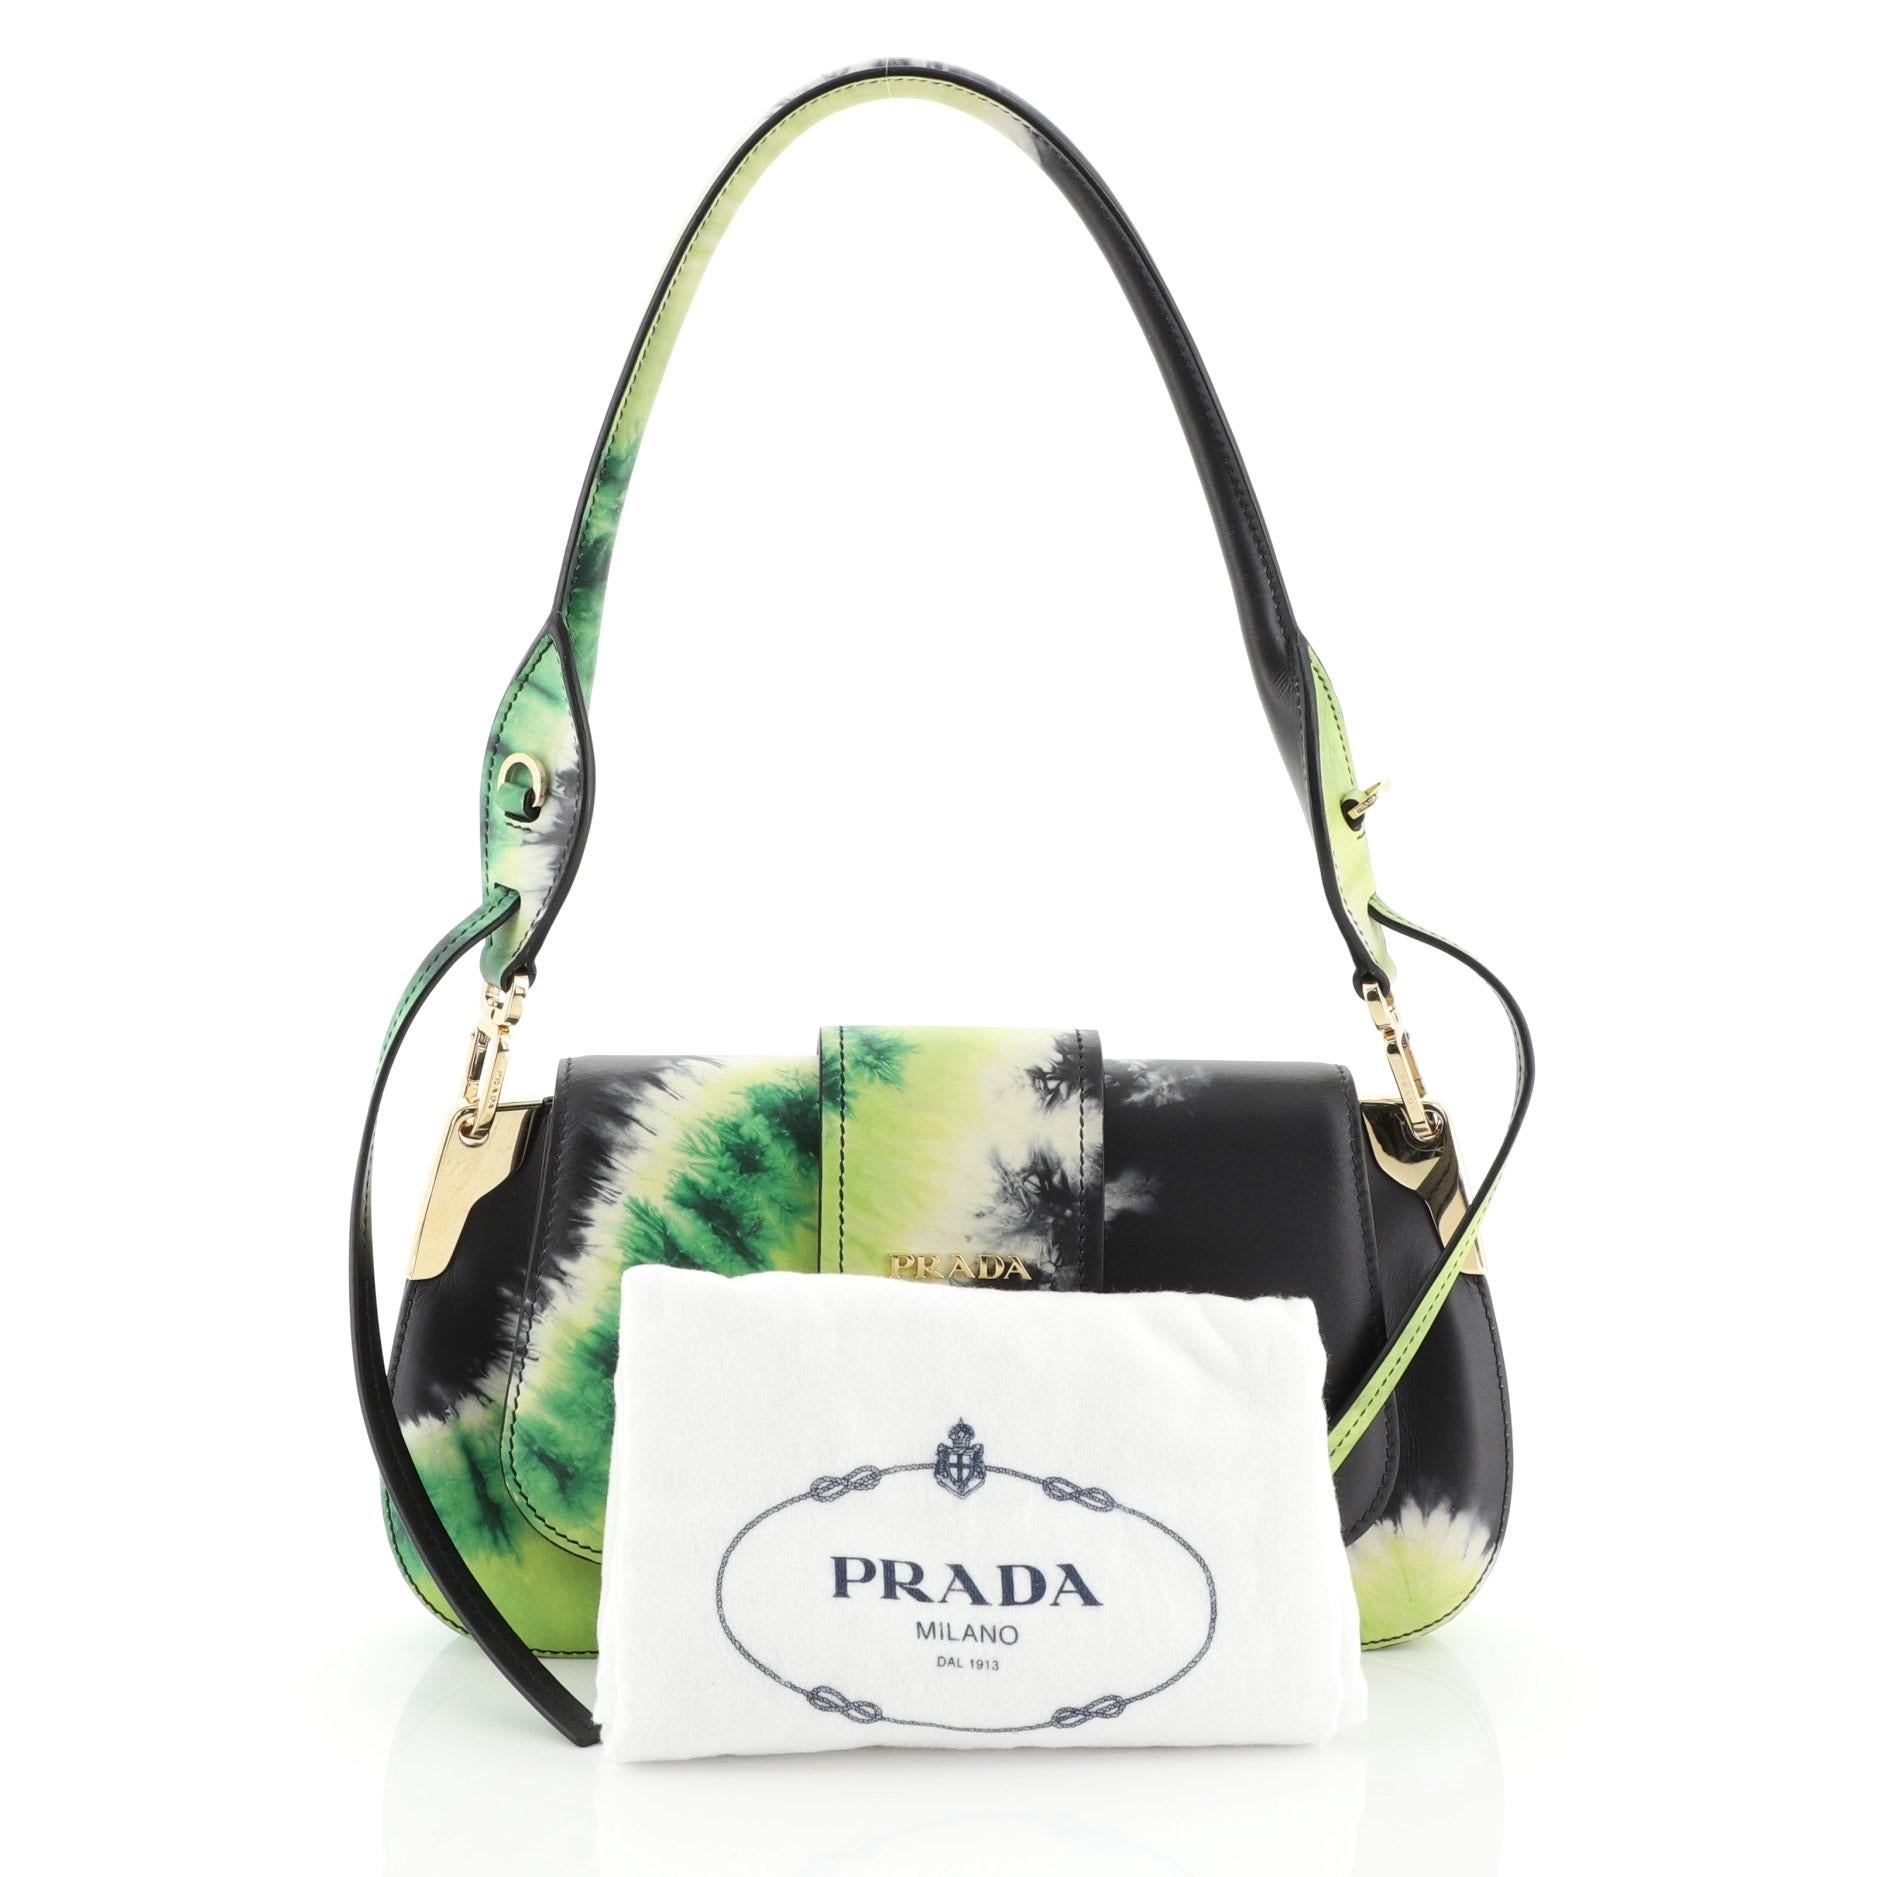 This Prada Sidonie Shoulder Bag Printed Leather Medium, crafted from green printed leather, features a rolled top handle and gold-tone hardware. Its flap opens to a black leather interior with side slip pocket. 

Estimated Retail Price: